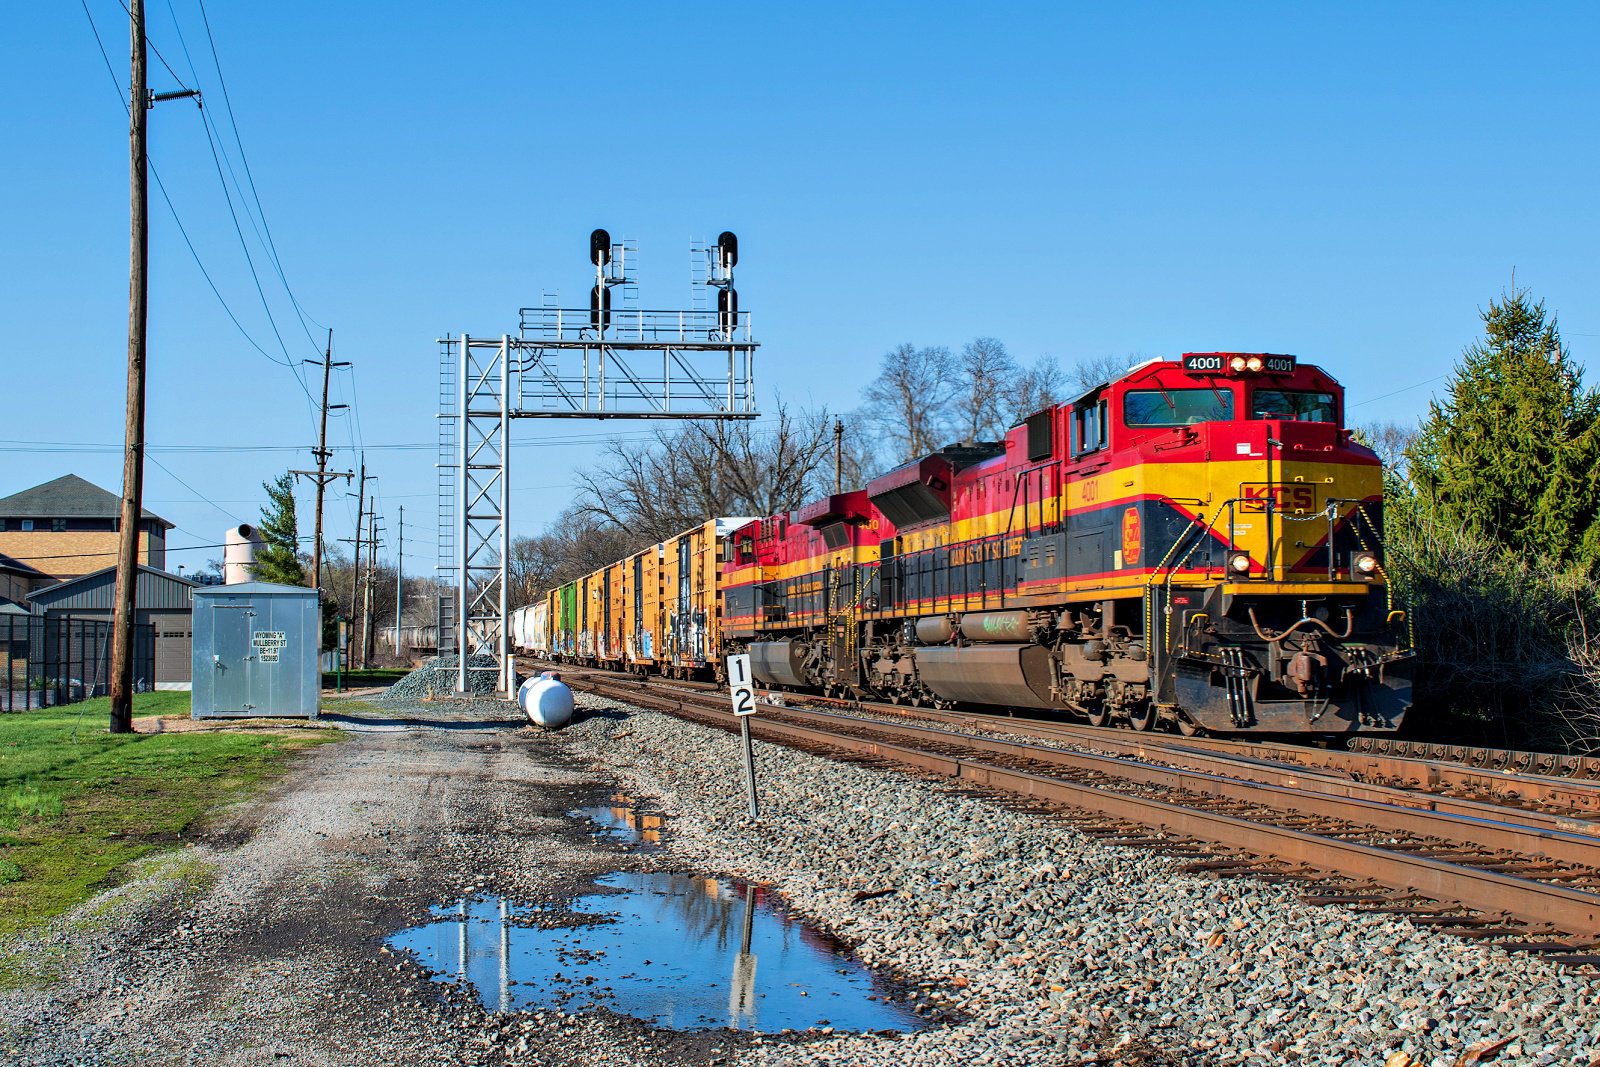 KCS 4001 is a class EMD SD70ACe and  is pictured in Wyoming, Ohio, United States.  This was taken along the Cincinnati Terminal Subdivision on the CSX Transportation. Photo Copyright: David Rohdenburg uploaded to Railroad Gallery on 03/26/2023. This photograph of KCS 4001 was taken on Sunday, March 26, 2023. All Rights Reserved. 